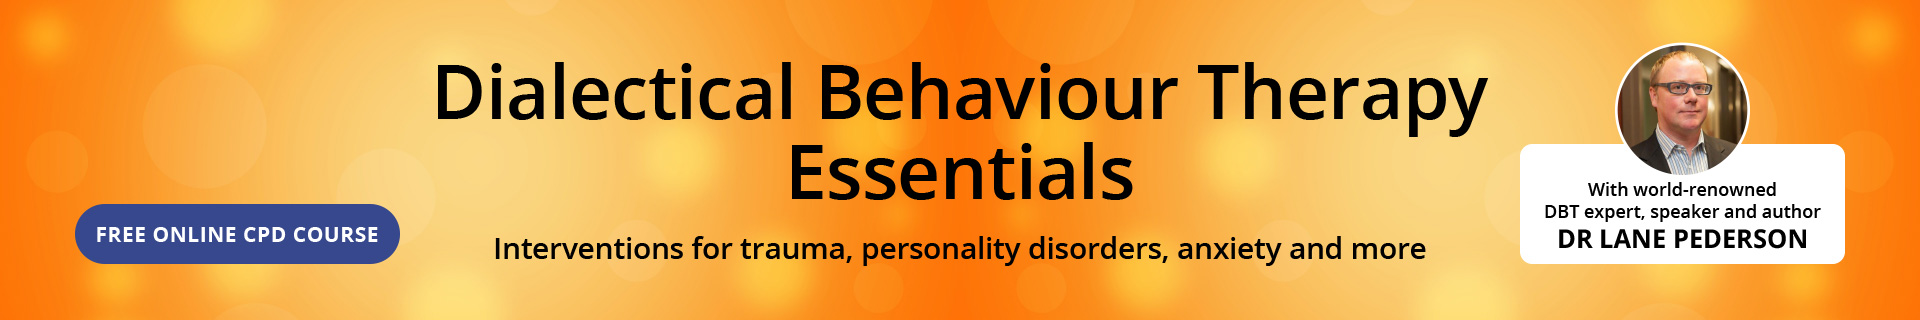 Dialectical Behaviour Therapy Essentials With Dr Lane Pederson: Interventions for Trauma, Personality Disorders, Anxiety and More